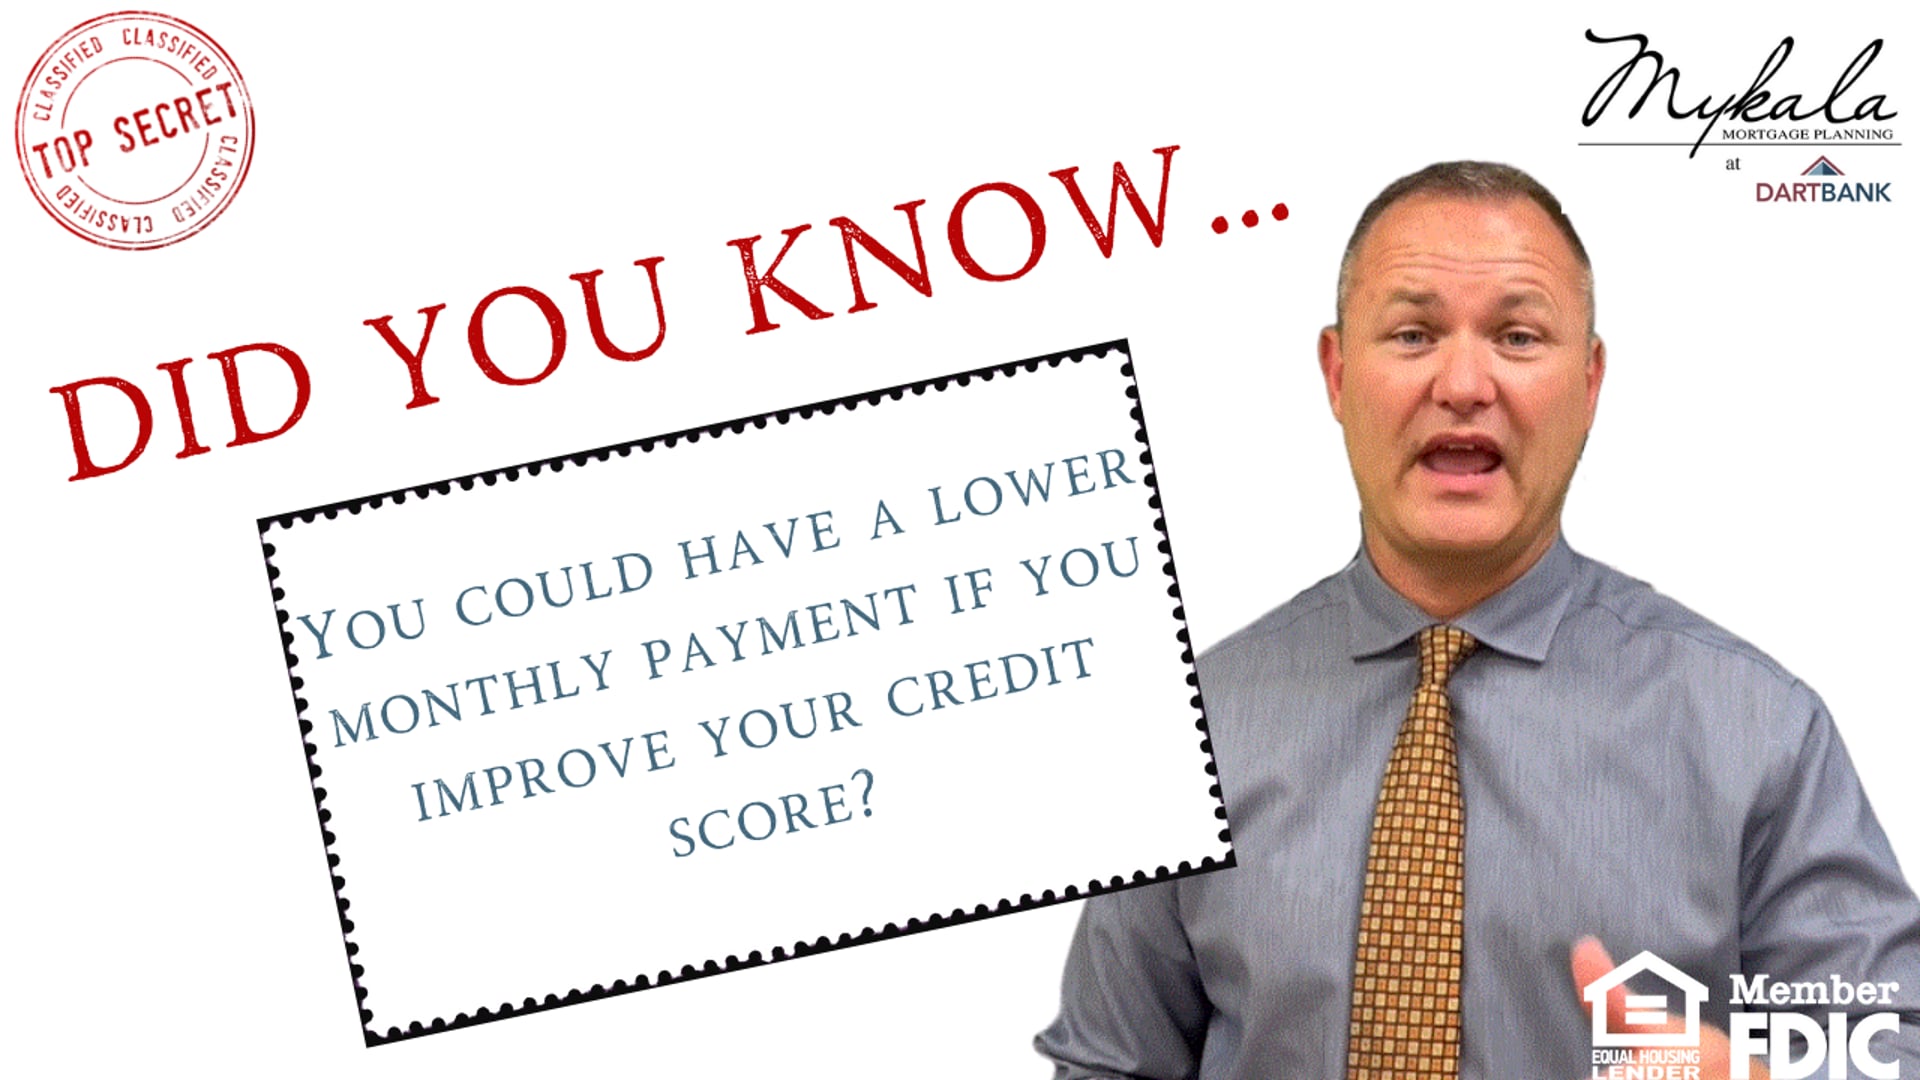 Higher Credit Score, Lower Monthly Payment